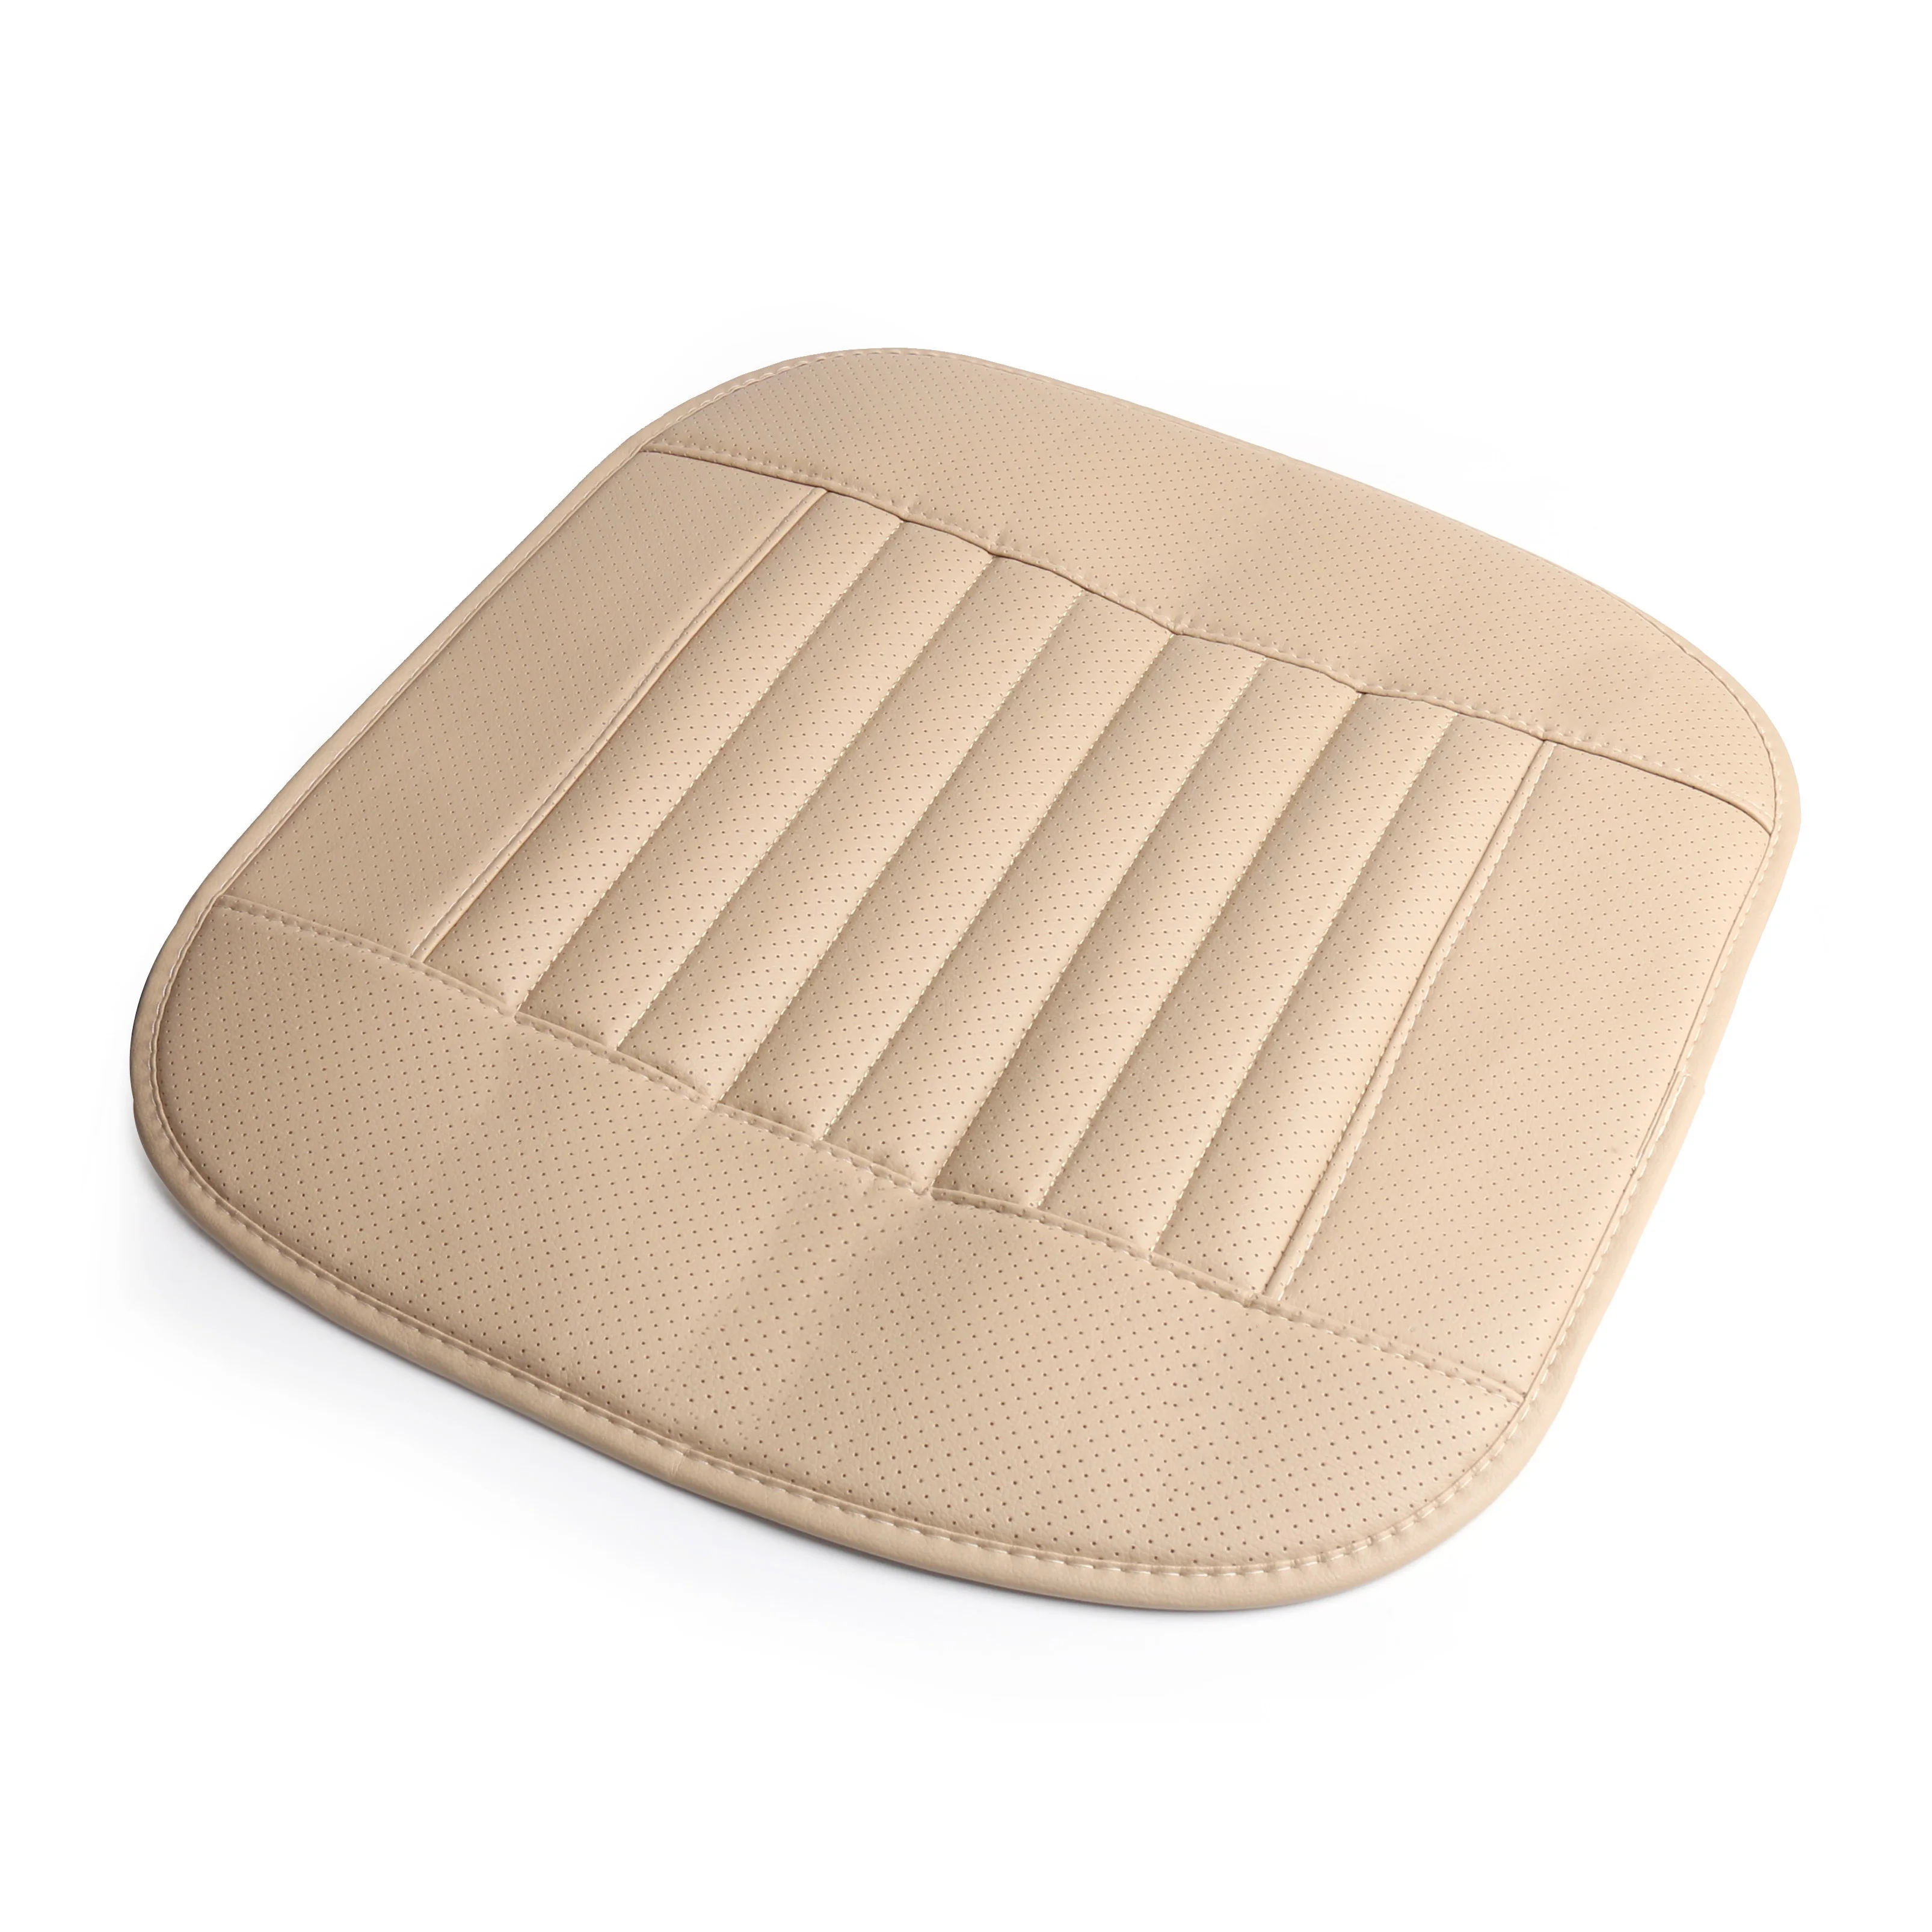 

Areyourshop Breathable Bamboo Charcoal Car Seat Cushion Cover Full Surround Protect Pad BE, Beige